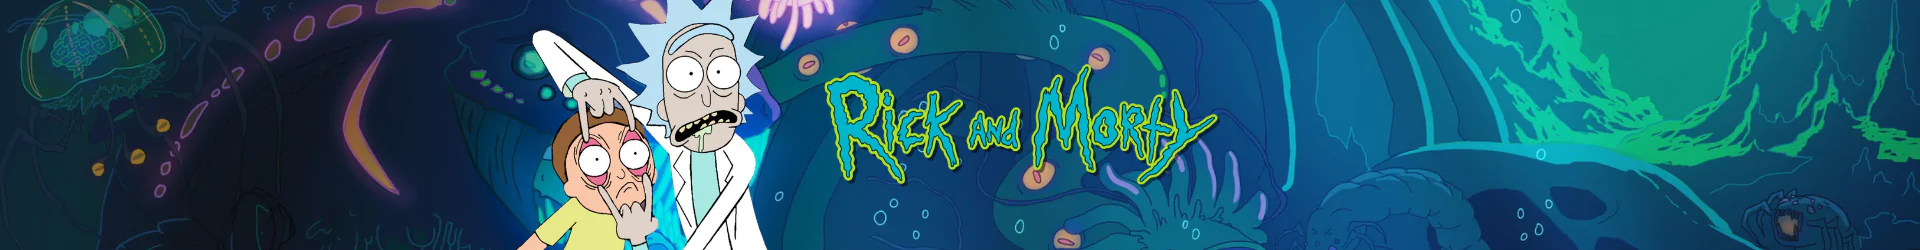 Rick and Morty brettspiele banner